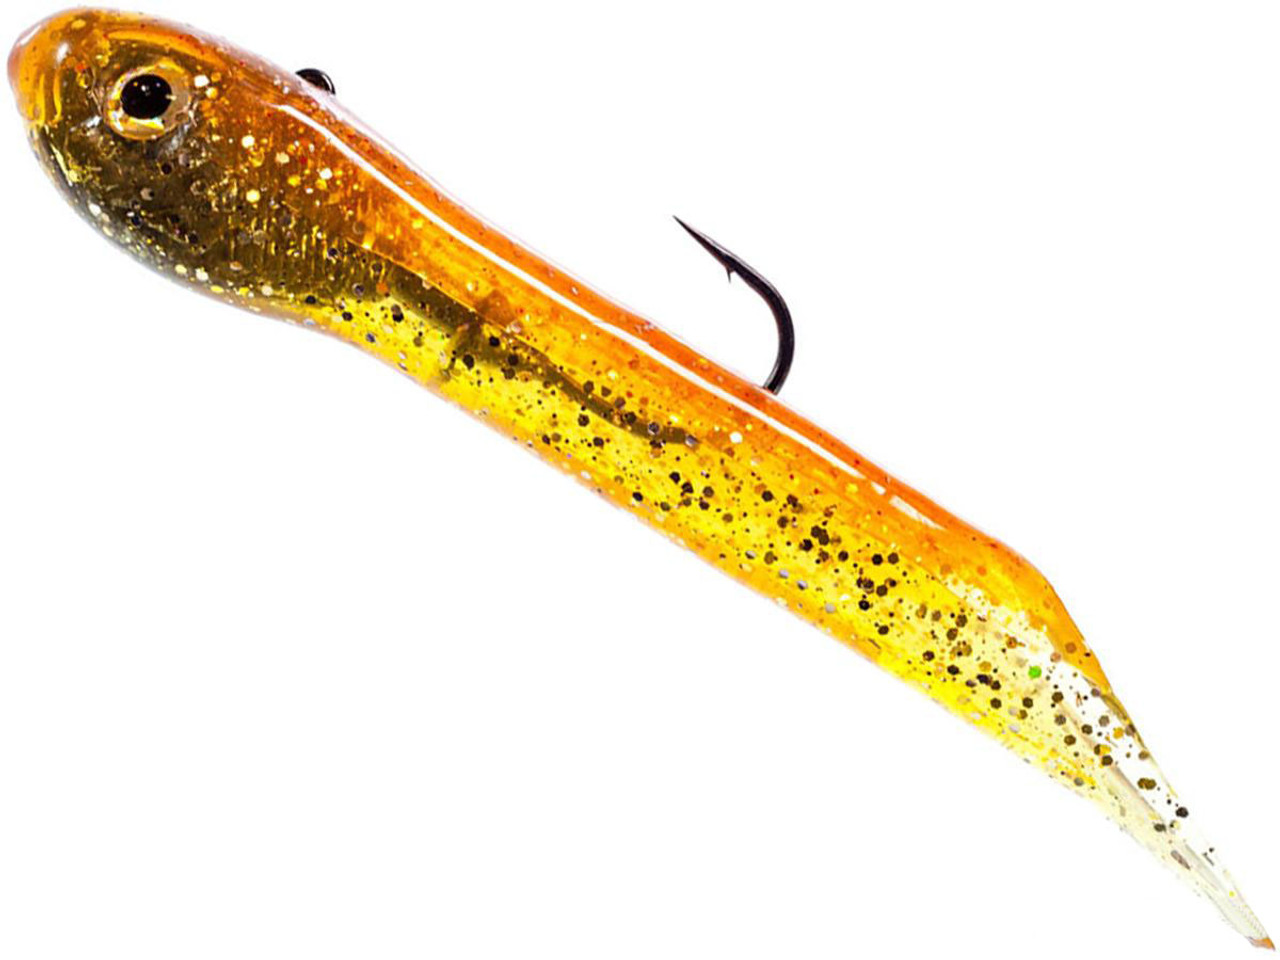 Hook Up Baits Handcrafted Soft Fishing Jigs (Color: Orange Gold